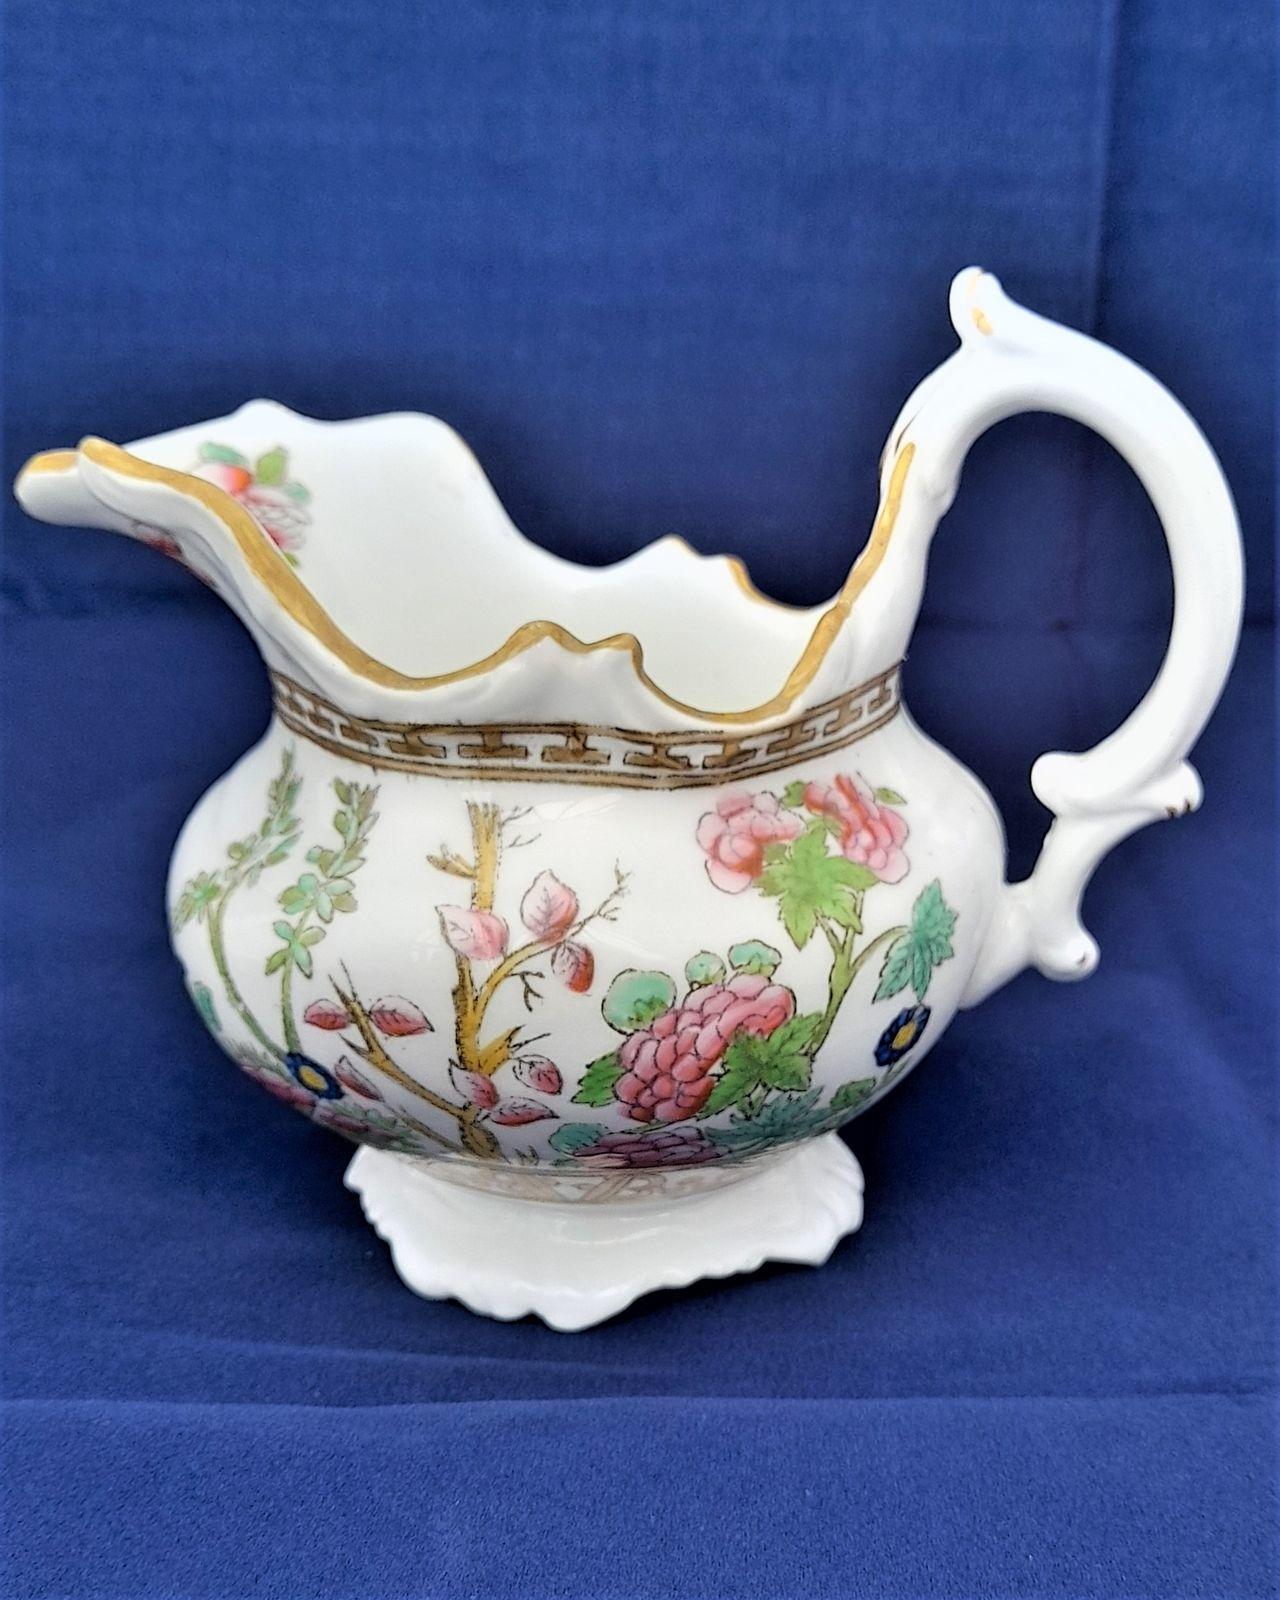 An antique John Rose Coalport porcelain creamer or milk jug decorated with a transfer printed and hand coloured Indian Tree Pattern.  Antique circa 1836 Made in a squat melon shape with a moulded scroll edge and quadrate base. The jug has a composite "C" scroll handle.with thumb rest.